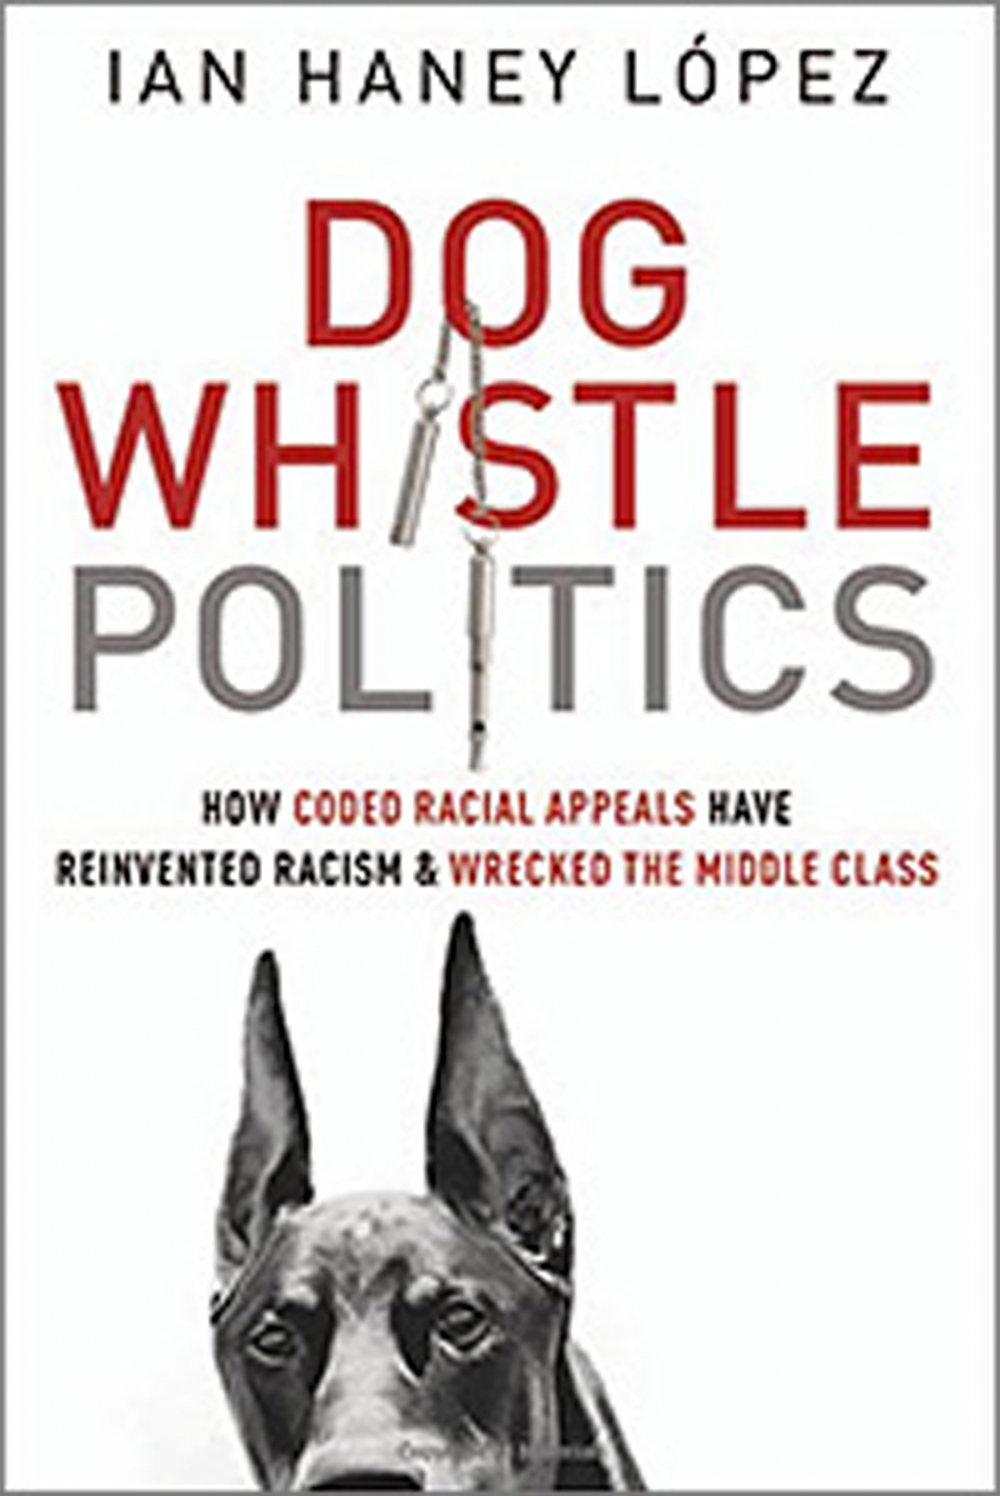 cover for Dog Whistle Politics. Title of the book is in red text and the image of a dog's head peers up from the bottom of the cover. The dog appears to be a doberman pinscher.